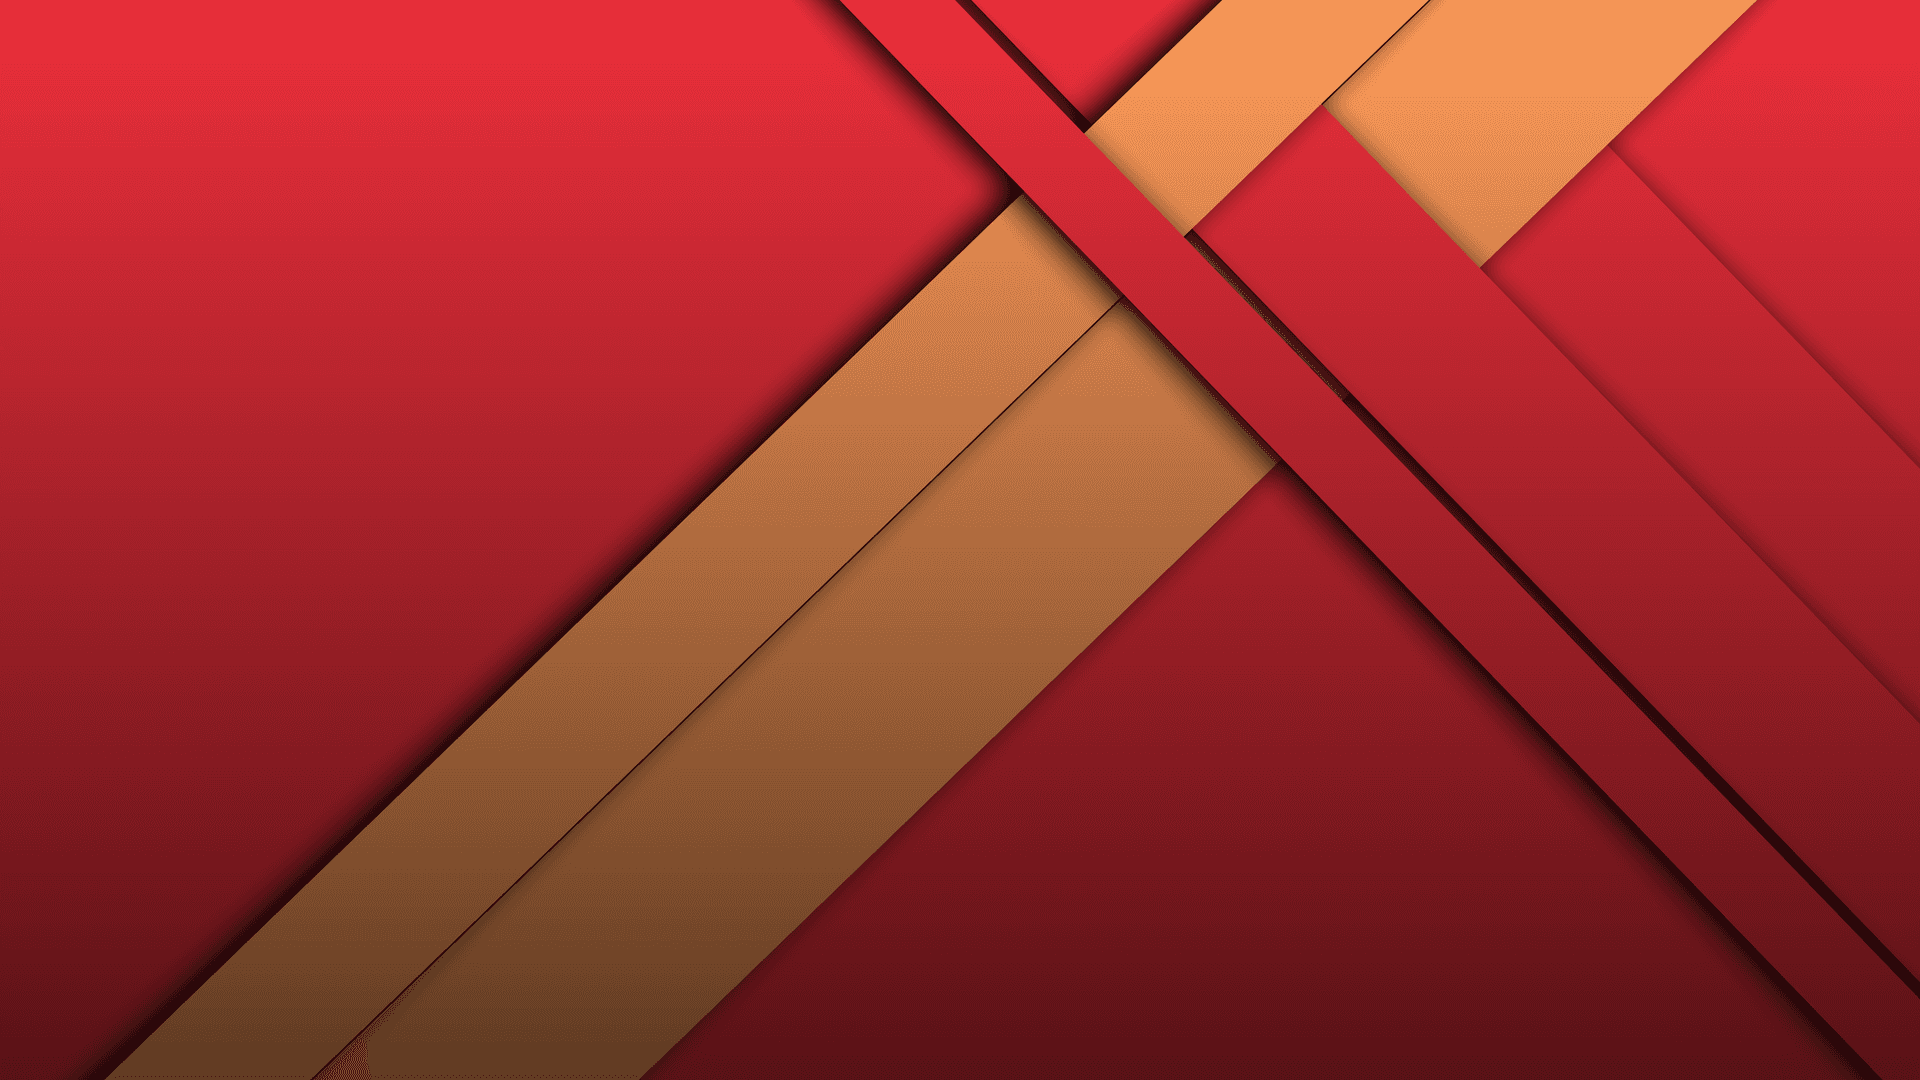 Red Gold Background Images  Free Download on Freepik